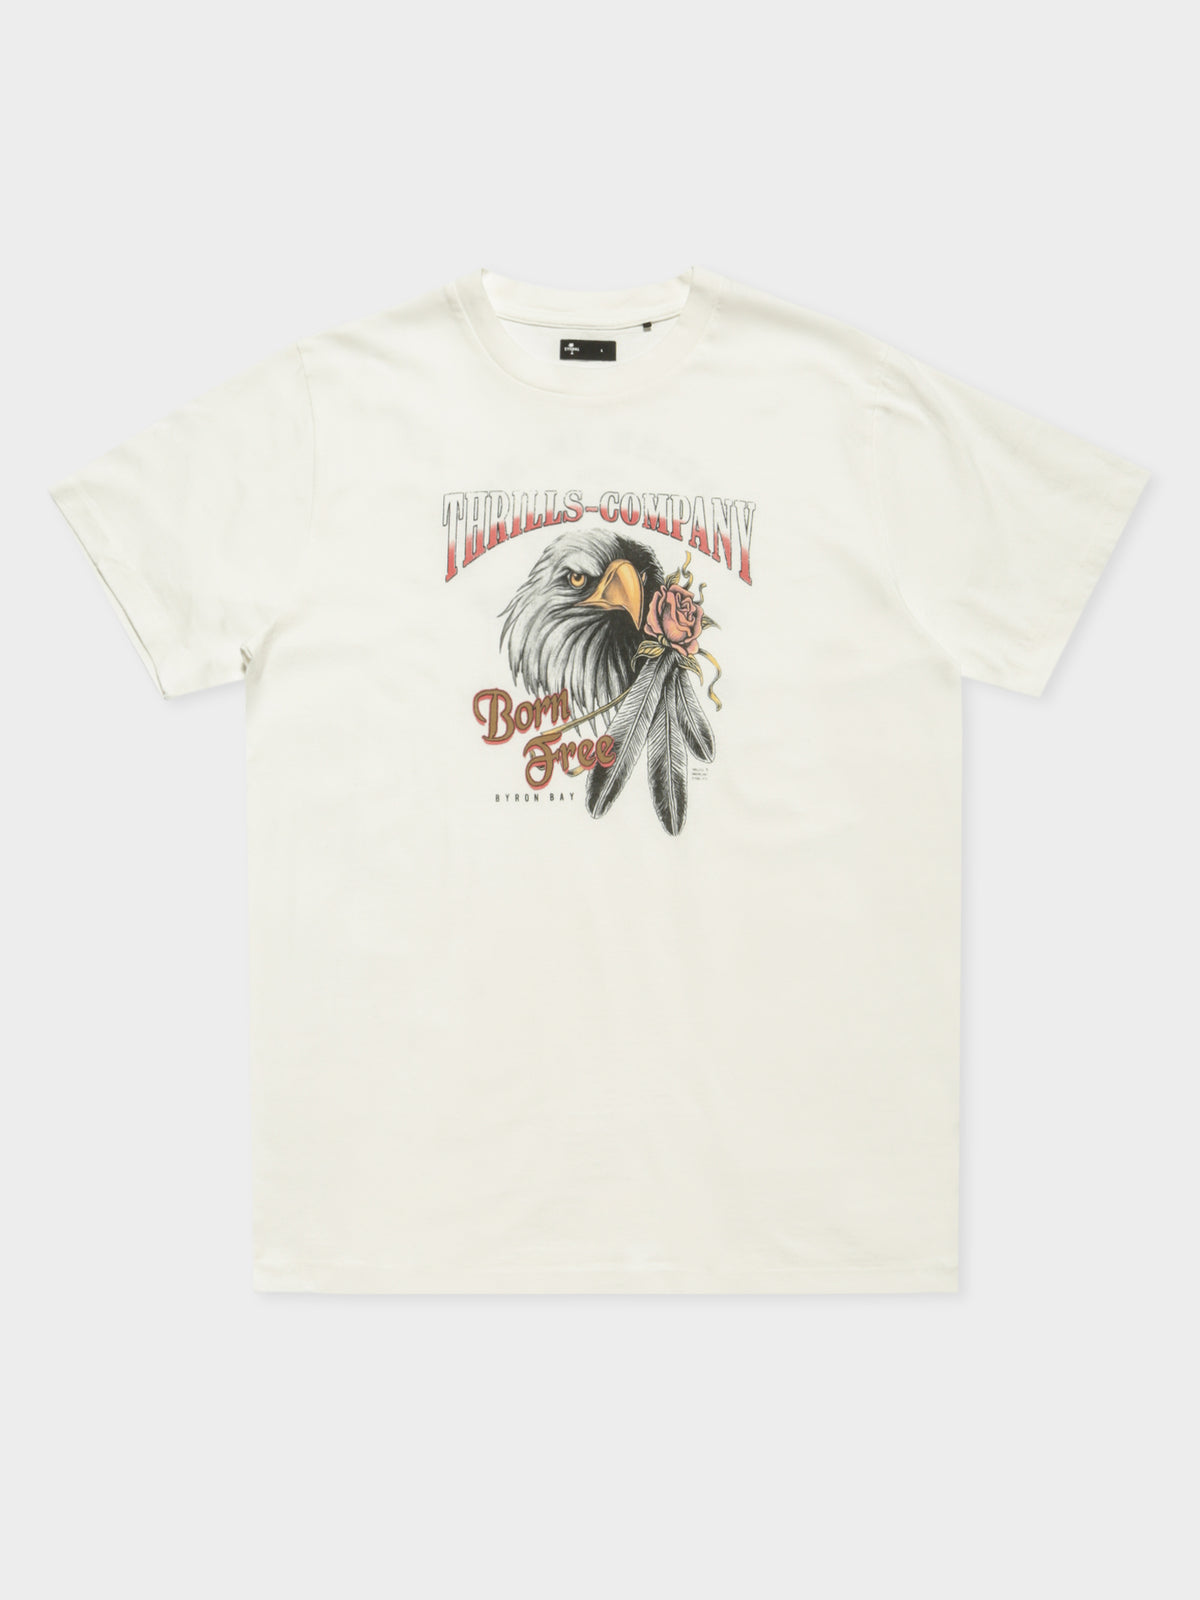 Feather Rose Merch T-Shirt in Dirty White